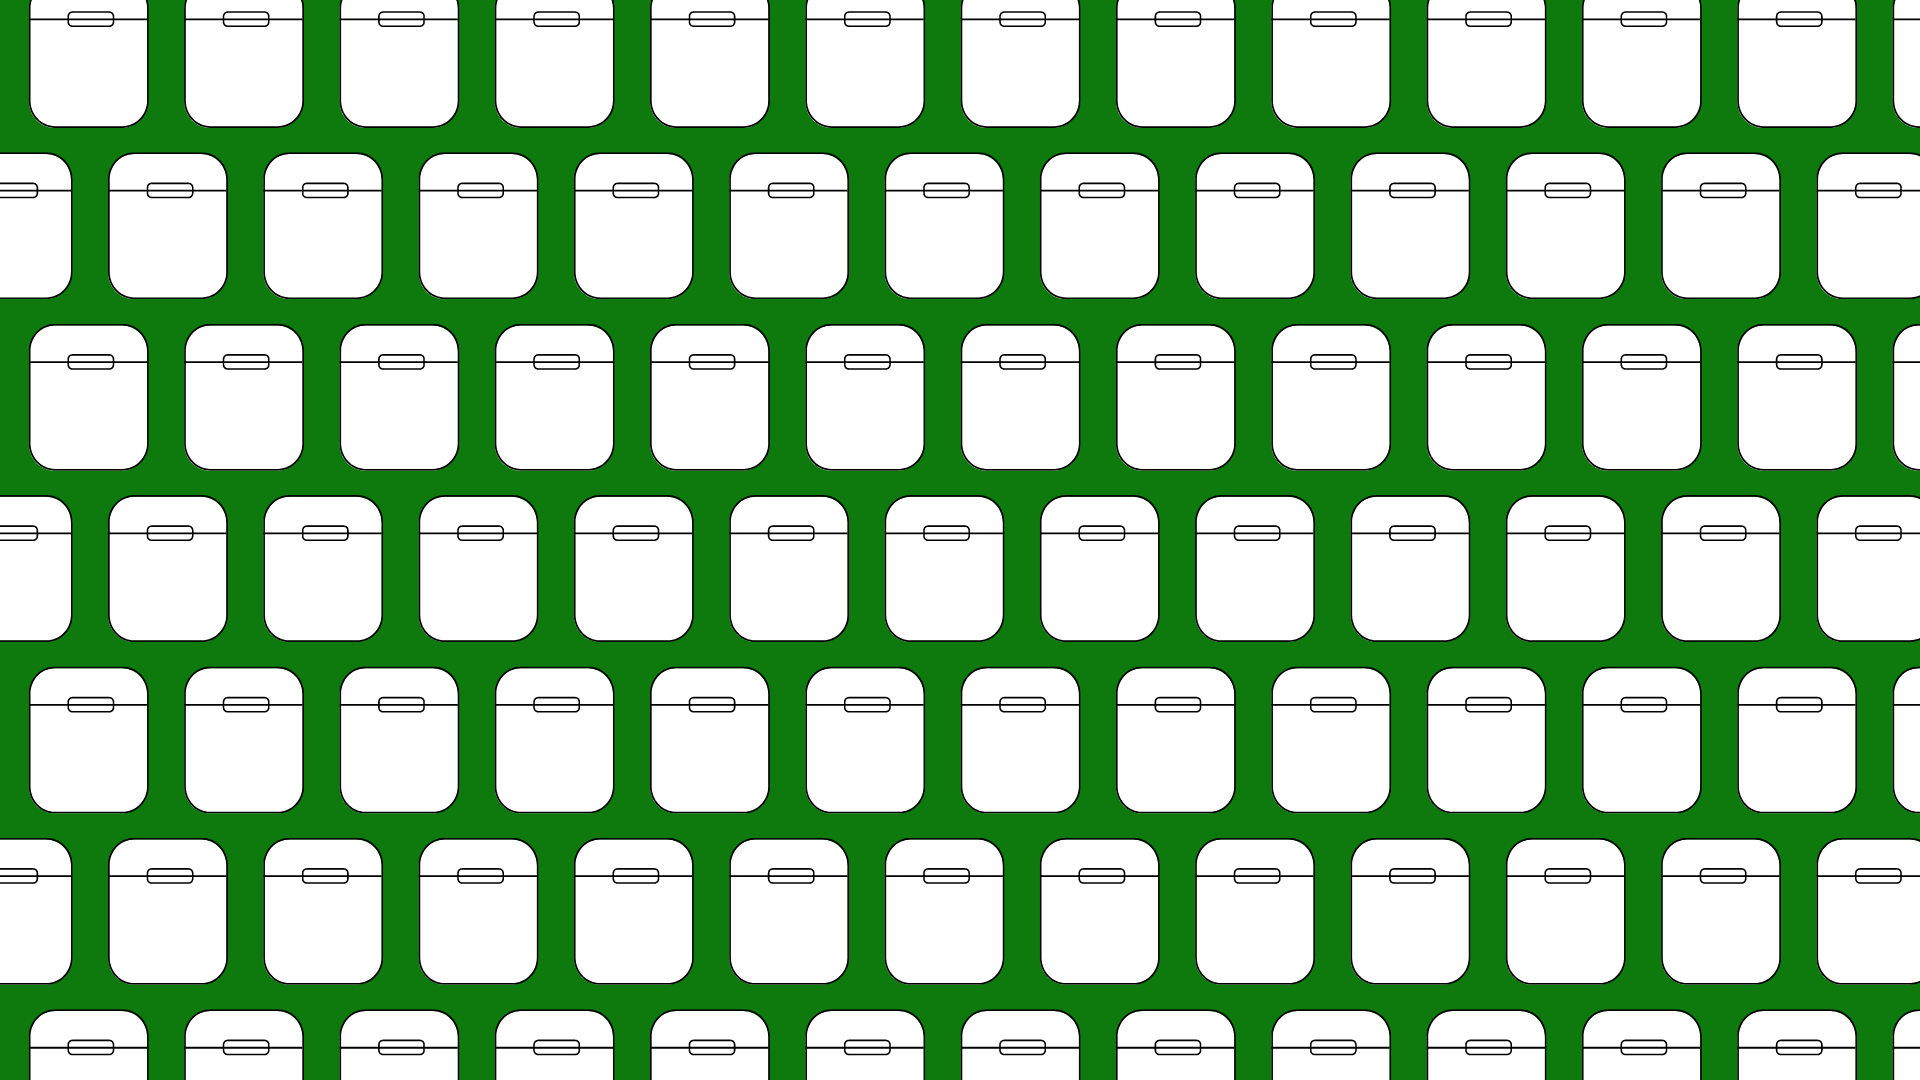 A pattern of AirPod cases on green